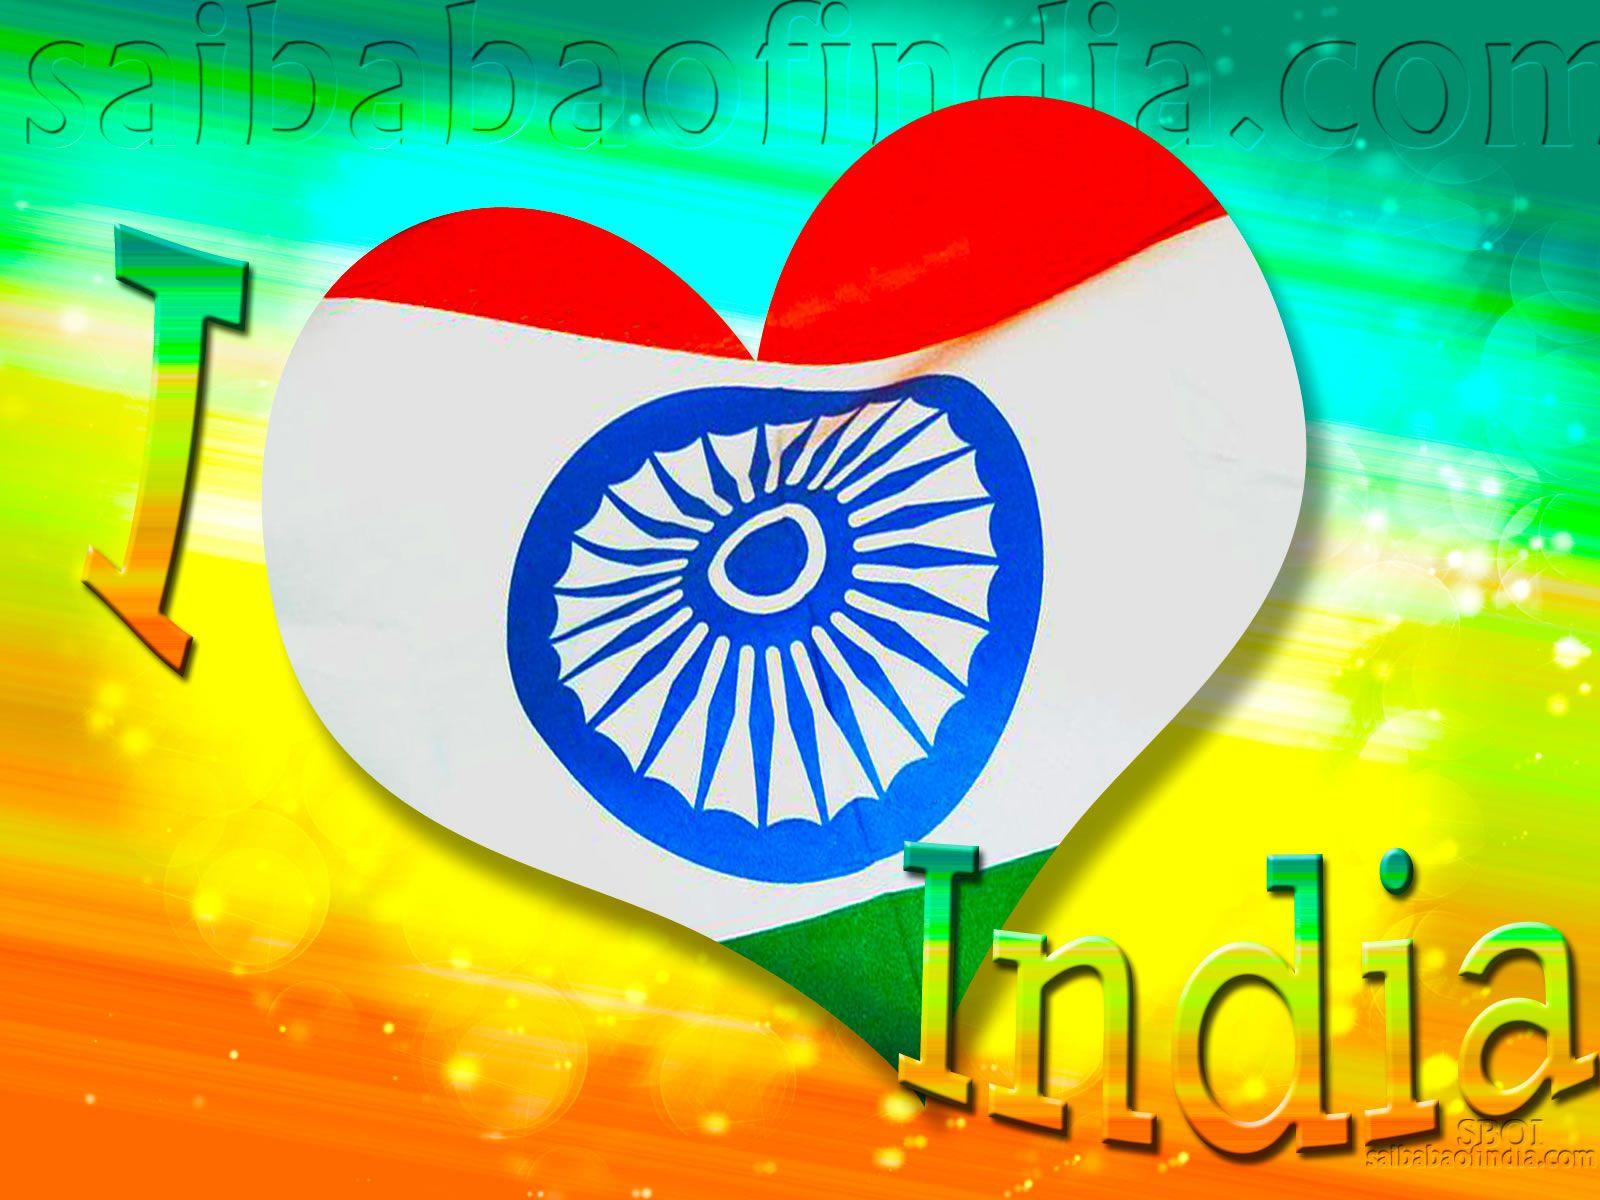 Independence day wallpaper & greeting cards 15th August- Sai Baba